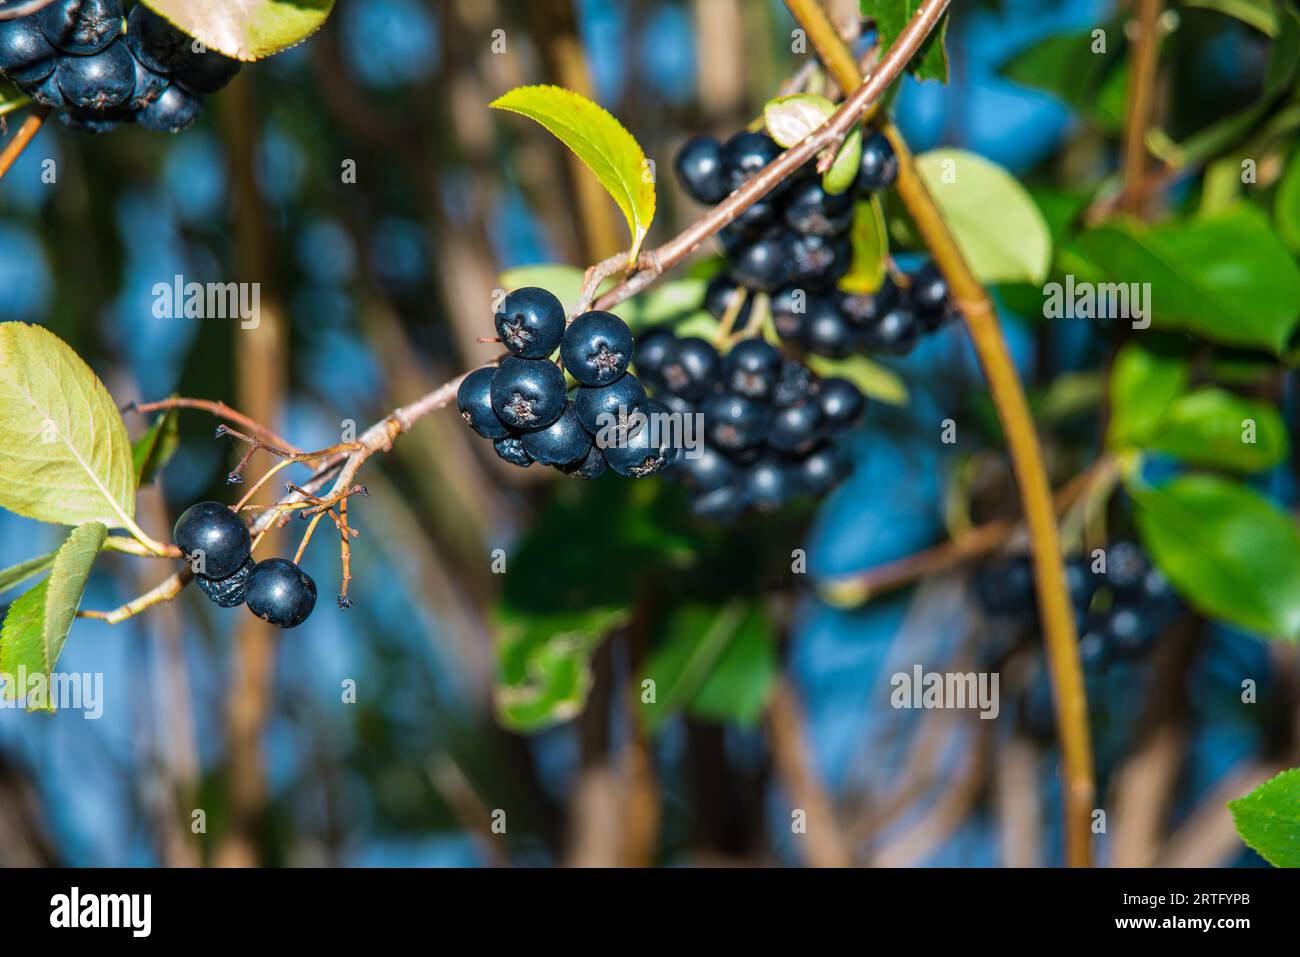 ripe Aronia berries on a tree in Germany Stock Photo